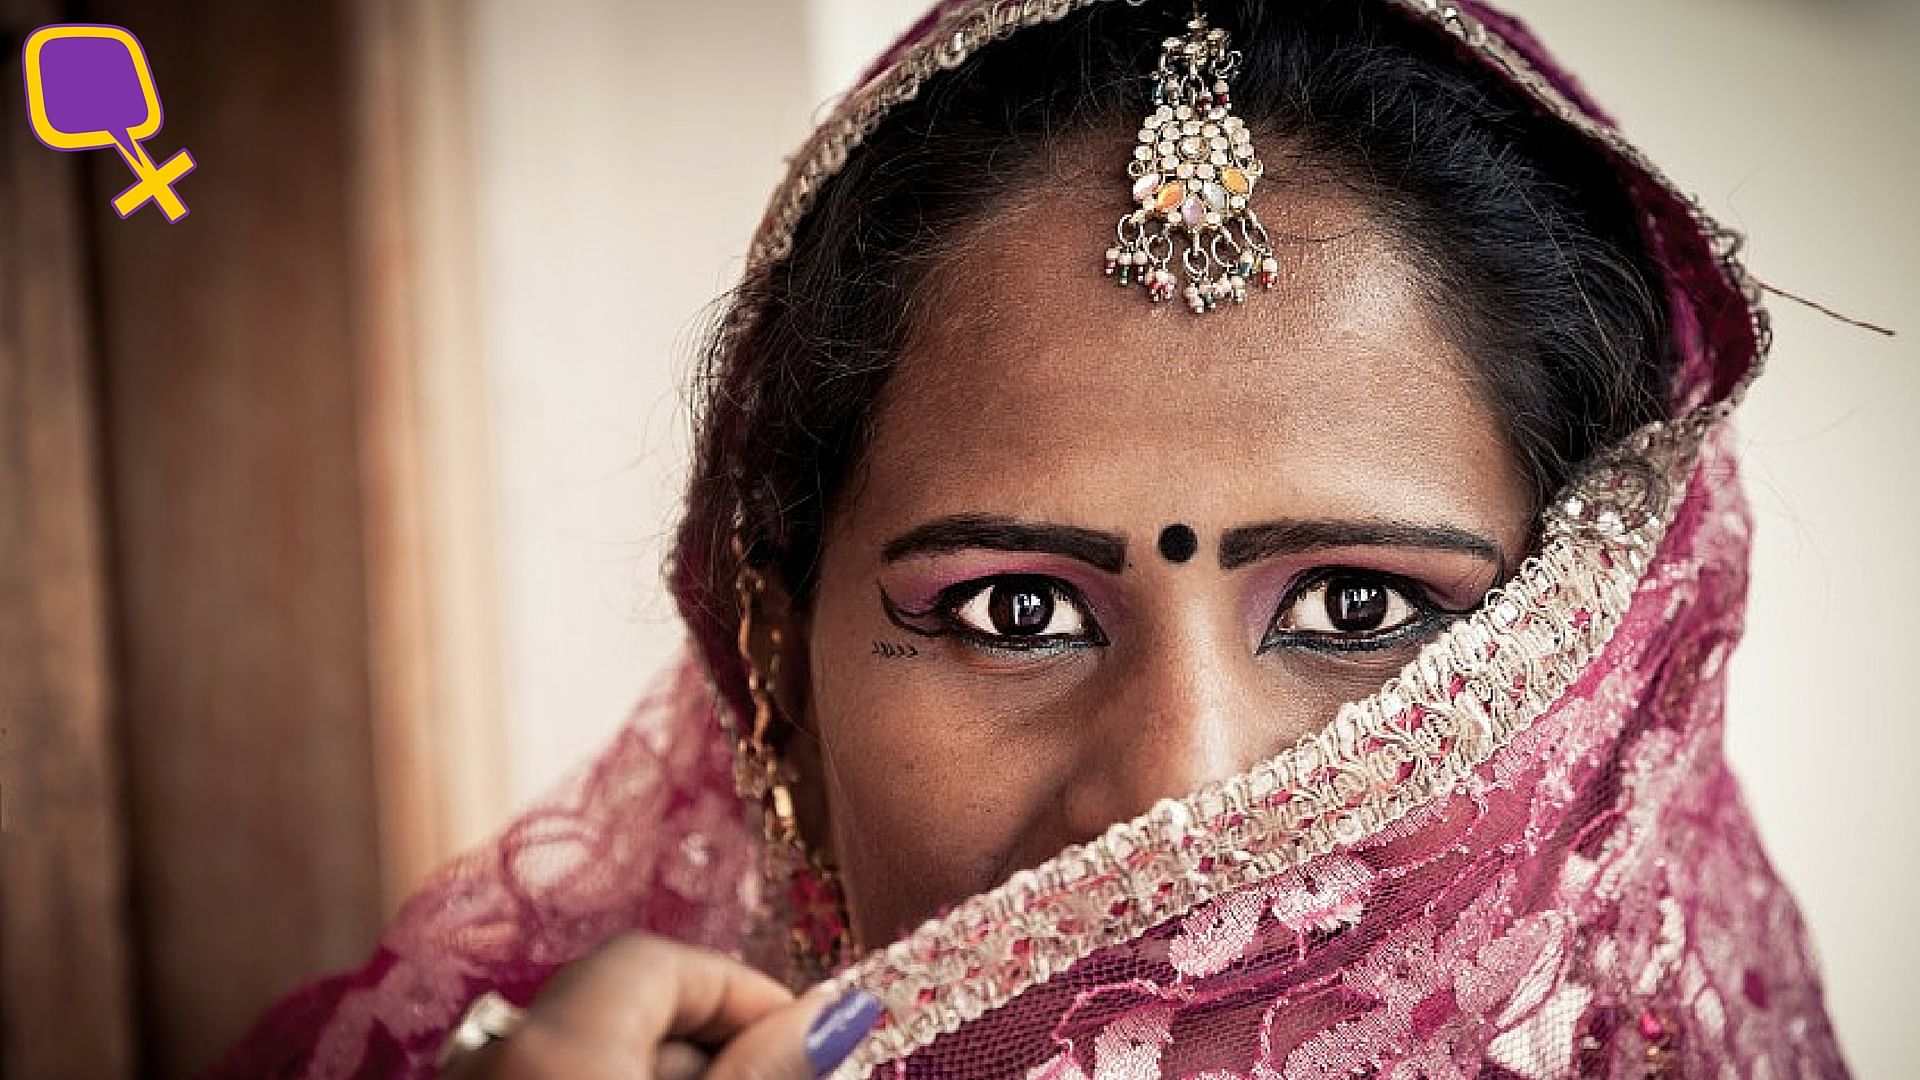 Portrait of an Indian woman. (Photo: iStockphoto)